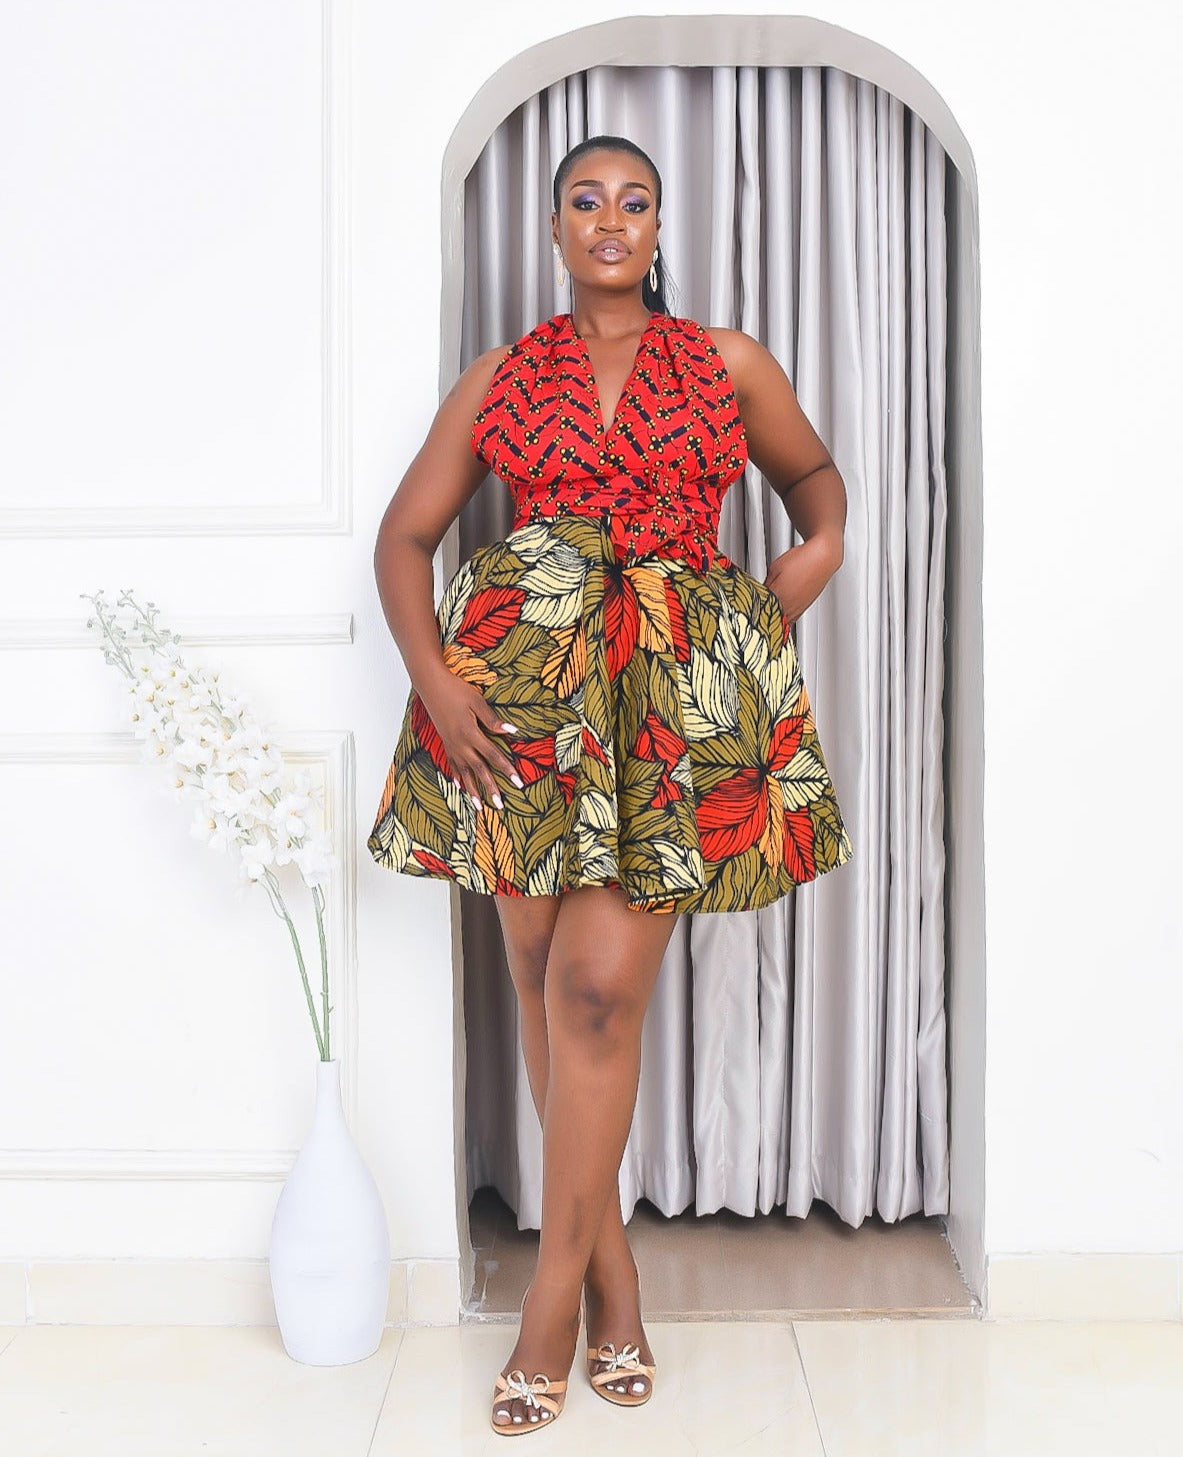 Wedding Gowns with African Print Designs - Weddings On Budget